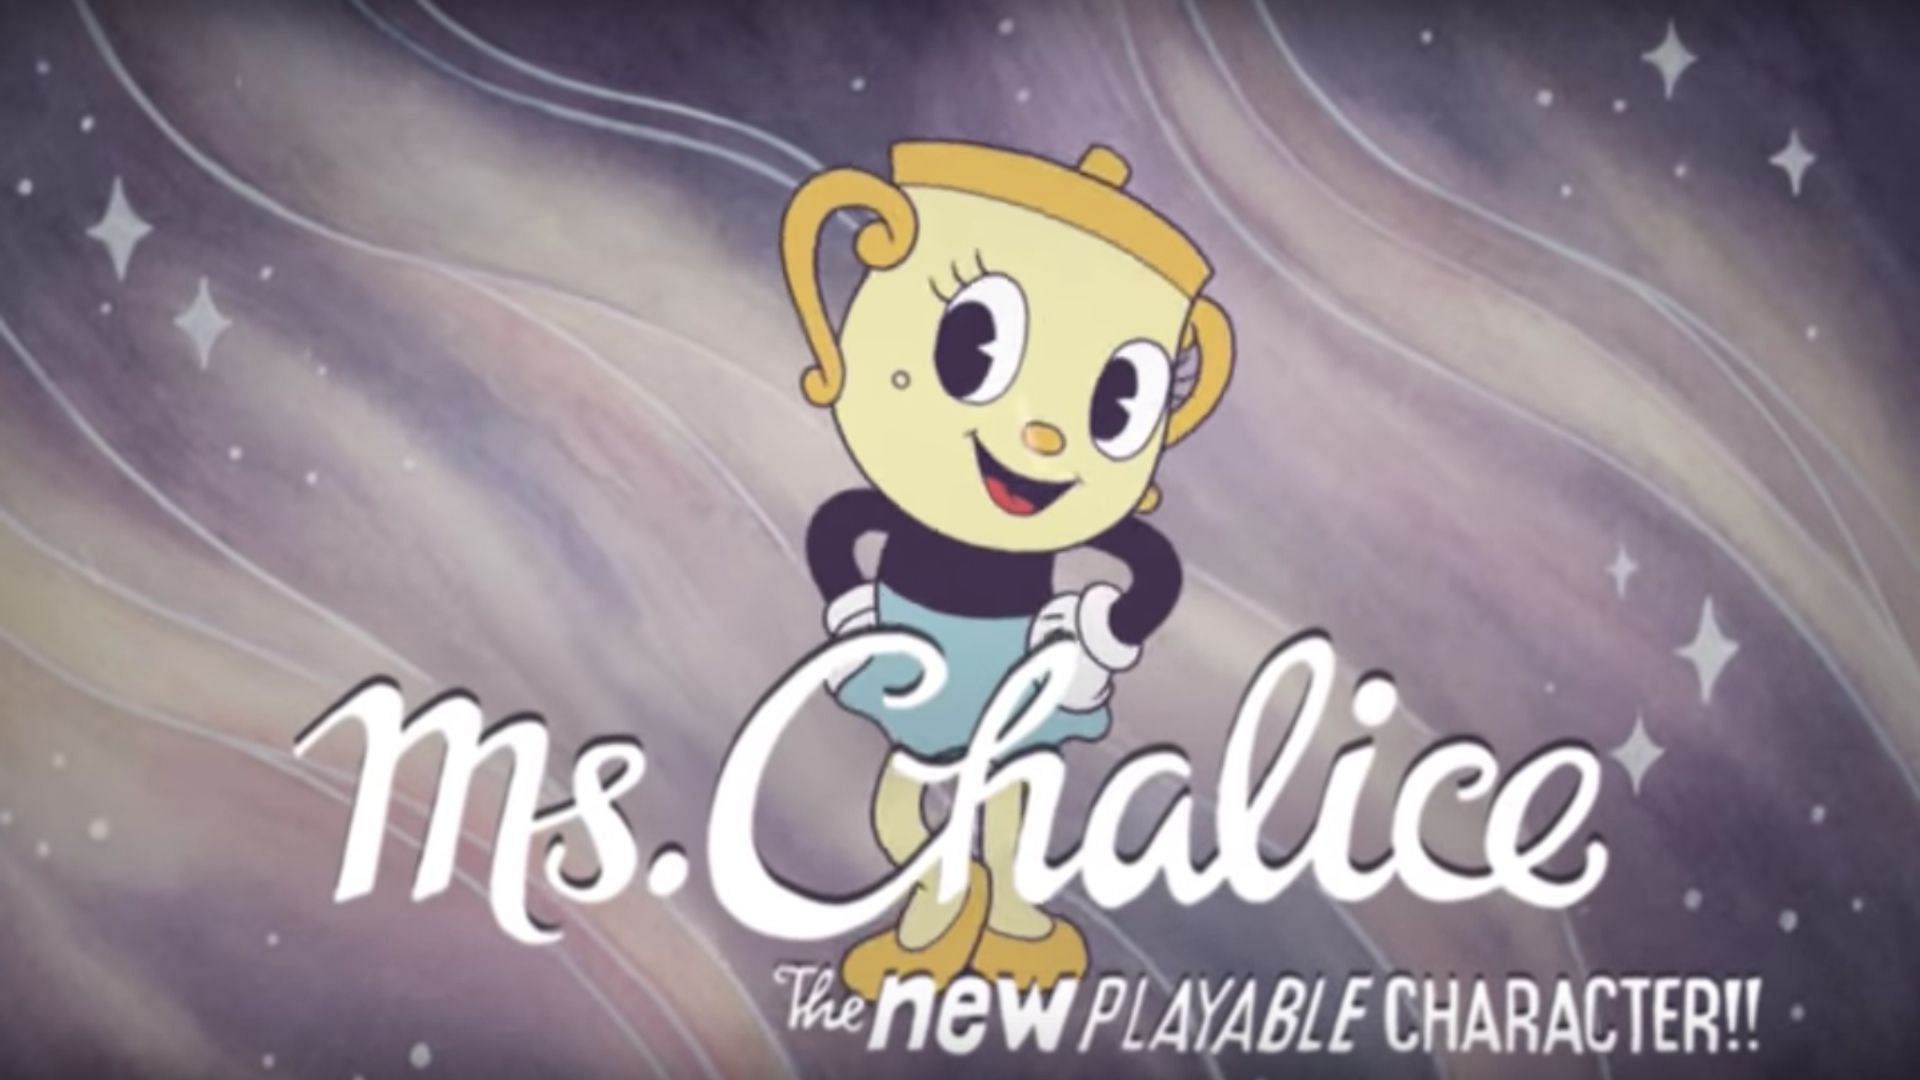 Official artwork for the new playable character, Ms. Chalice (Image via Studio MDHR)